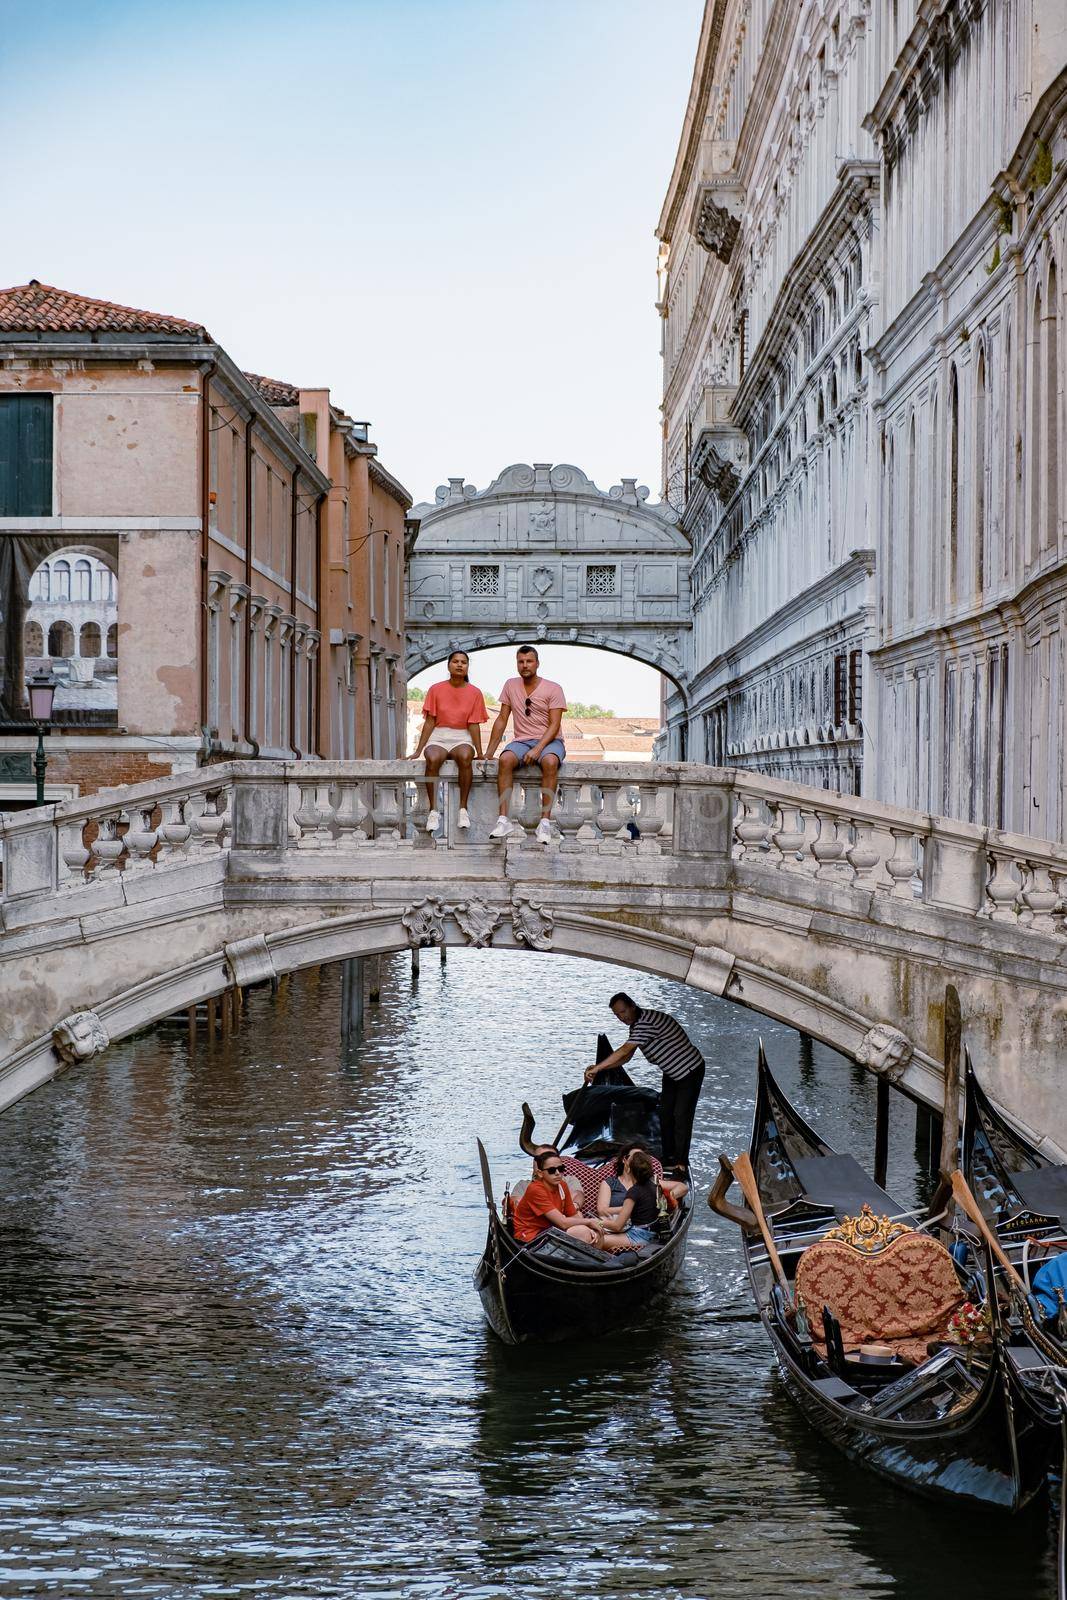 Canals of Venice Italy during summer in Europe,Architecture and landmarks of Venice by fokkebok